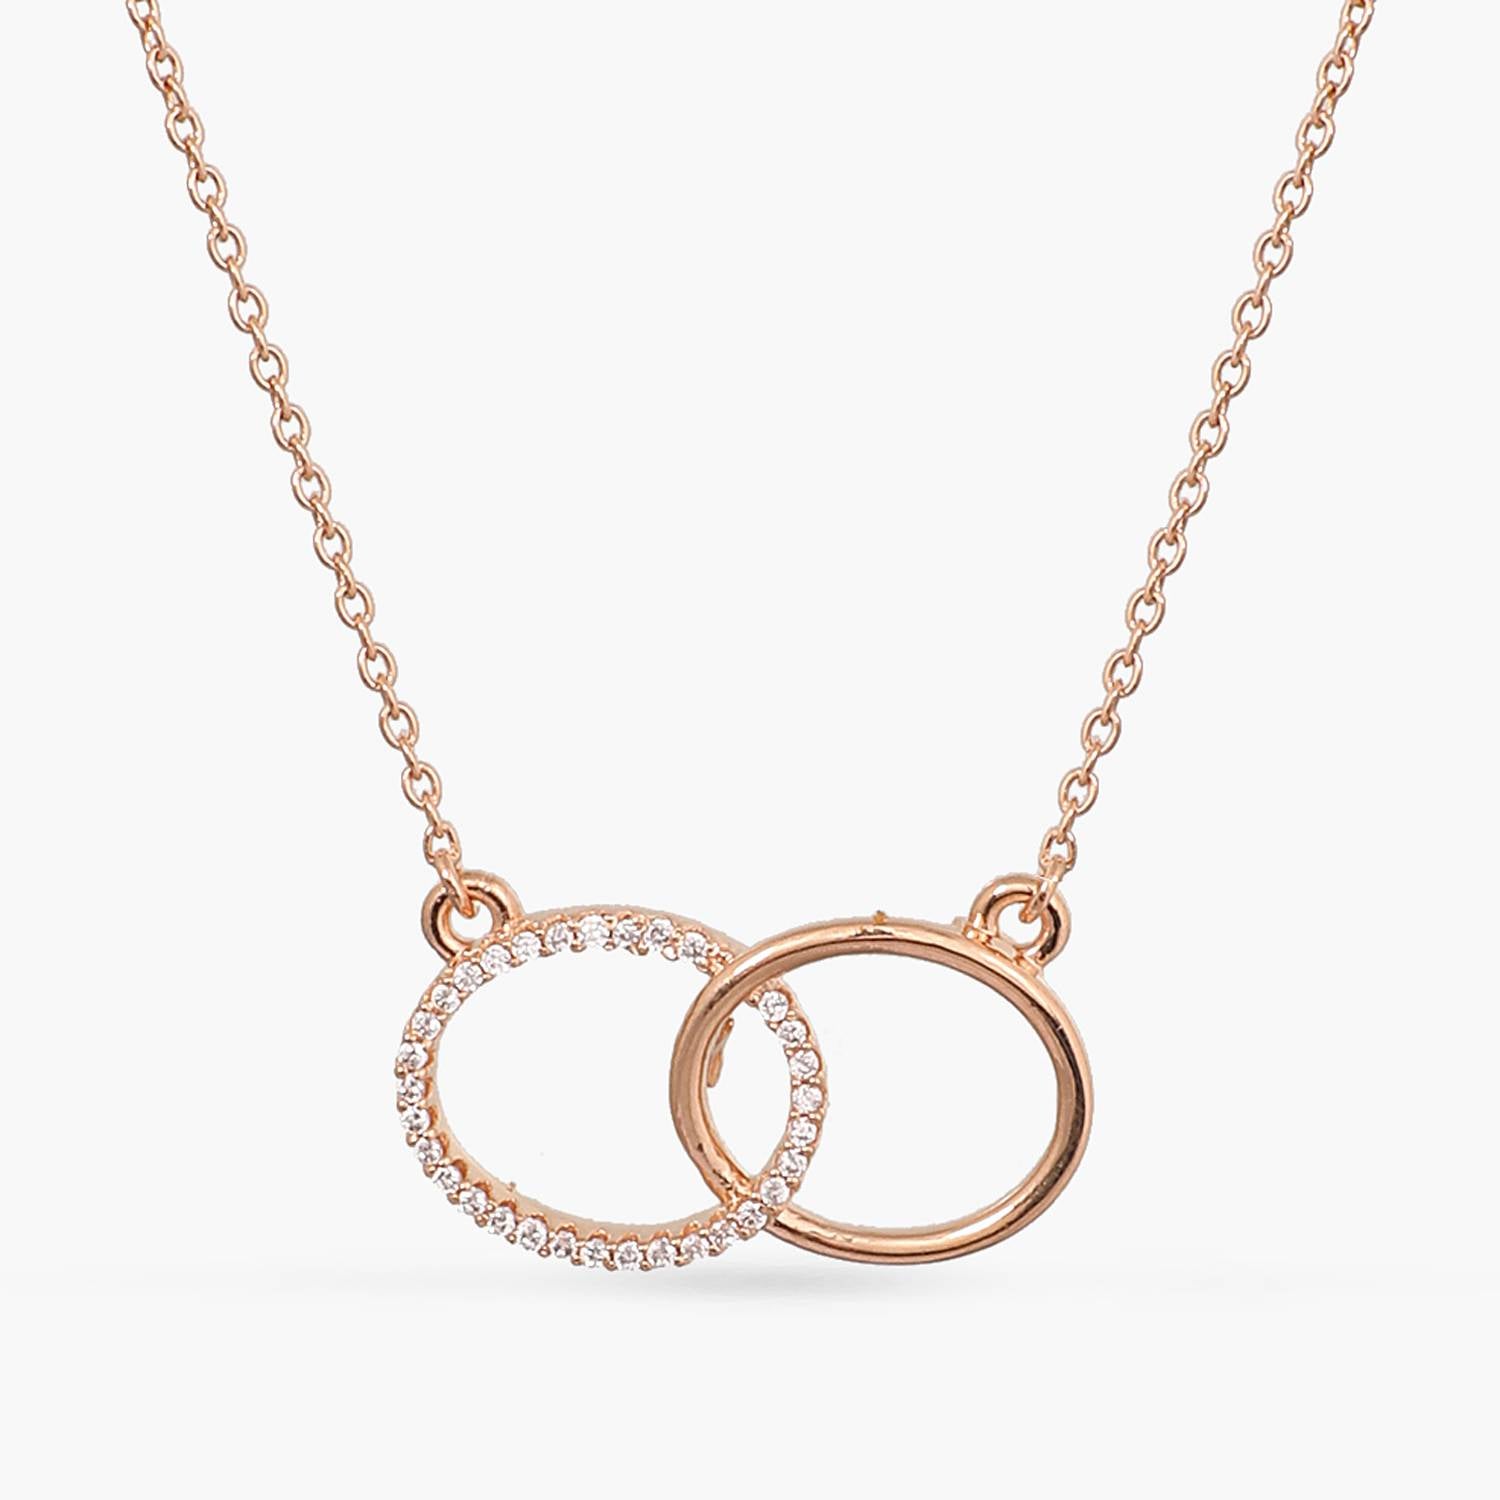 Amazon.com: 14K Real Solid Gold Two Circle Ring Hoop with Italian Balls  Cute Charm Dainty Delicate Trendy Pendant Necklace for Women | Best  Birthday gift for her : Handmade Products